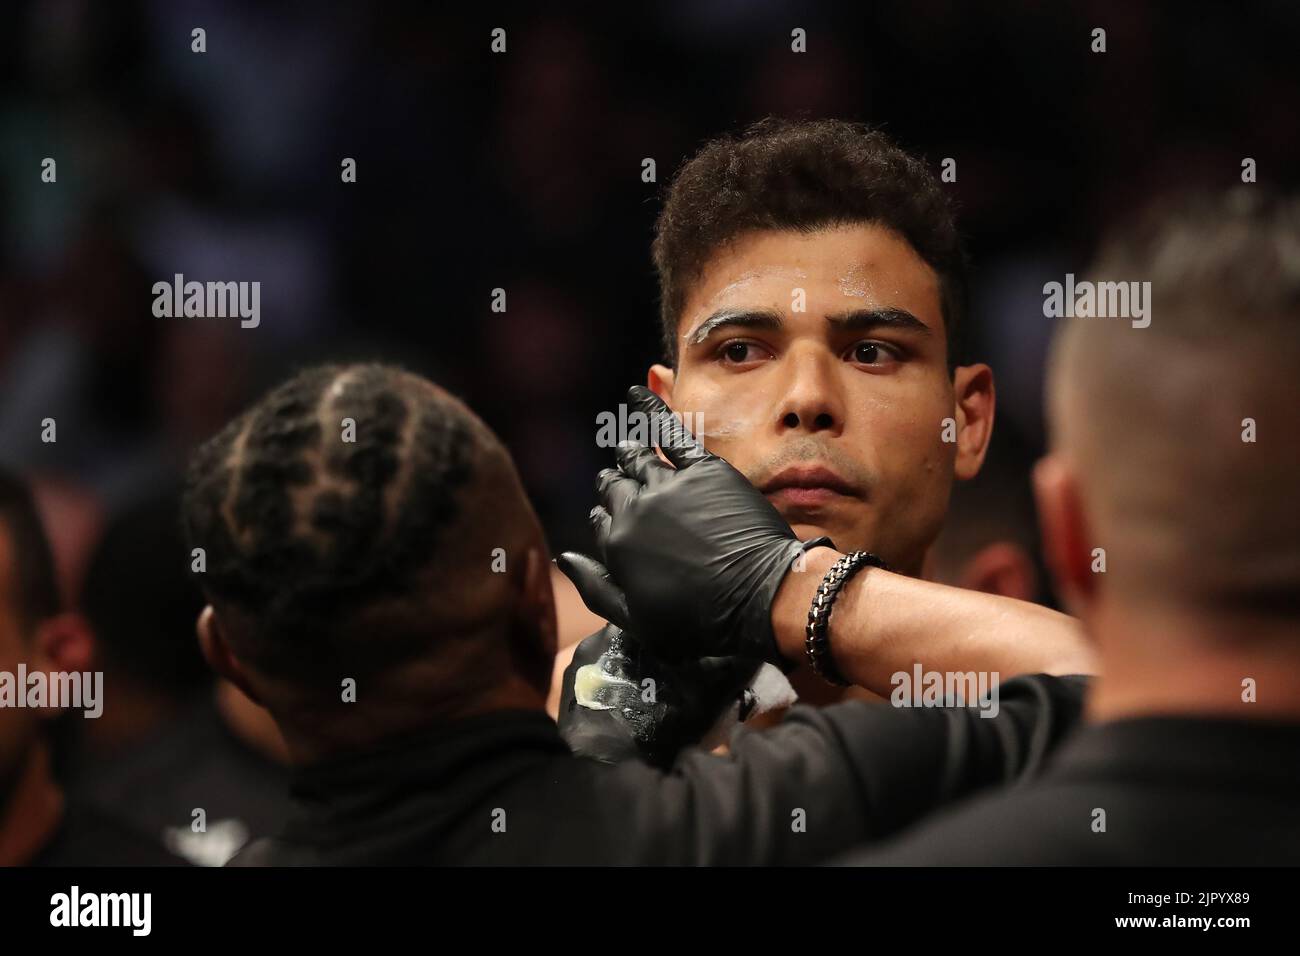 Salt Lake City, United States. 20th Aug, 2022. SALT LAKE CITY, UT - AUGUST 20: Paulo Costa prepares to fight Luke Rockhold in their Middleweight bout during the UFC 278 at the Vivint Arena on August 20, 2022 in Salt Lake City, Utah, United States. (Photo by Alejandro Salazar/PxImages) Credit: Px Images/Alamy Live News Stock Photo